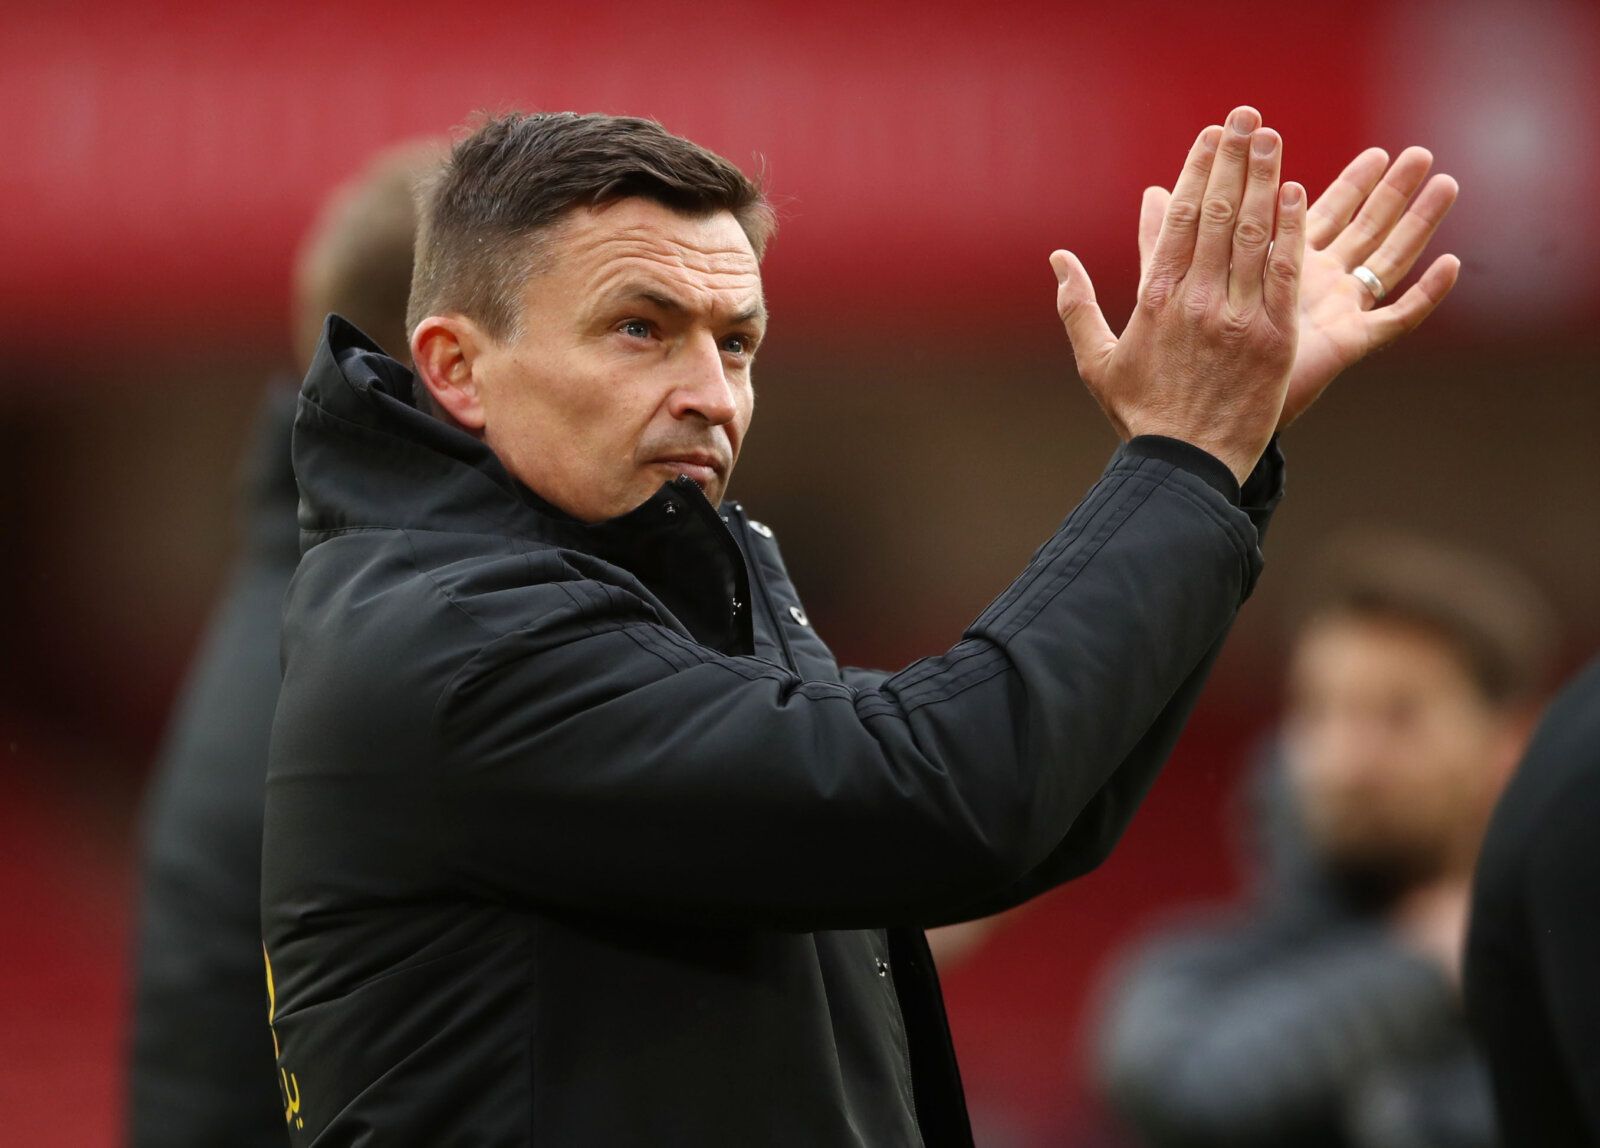 Soccer Football - Premier League - Sheffield United v Burnley - Bramall Lane, Sheffield, Britain - May 23, 2021 Sheffield United interim manager Paul Heckingbottom celebrates after the match Pool via REUTERS/Tim Goode EDITORIAL USE ONLY. No use with unauthorized audio, video, data, fixture lists, club/league logos or 'live' services. Online in-match use limited to 75 images, no video emulation. No use in betting, games or single club /league/player publications.  Please contact your account repr